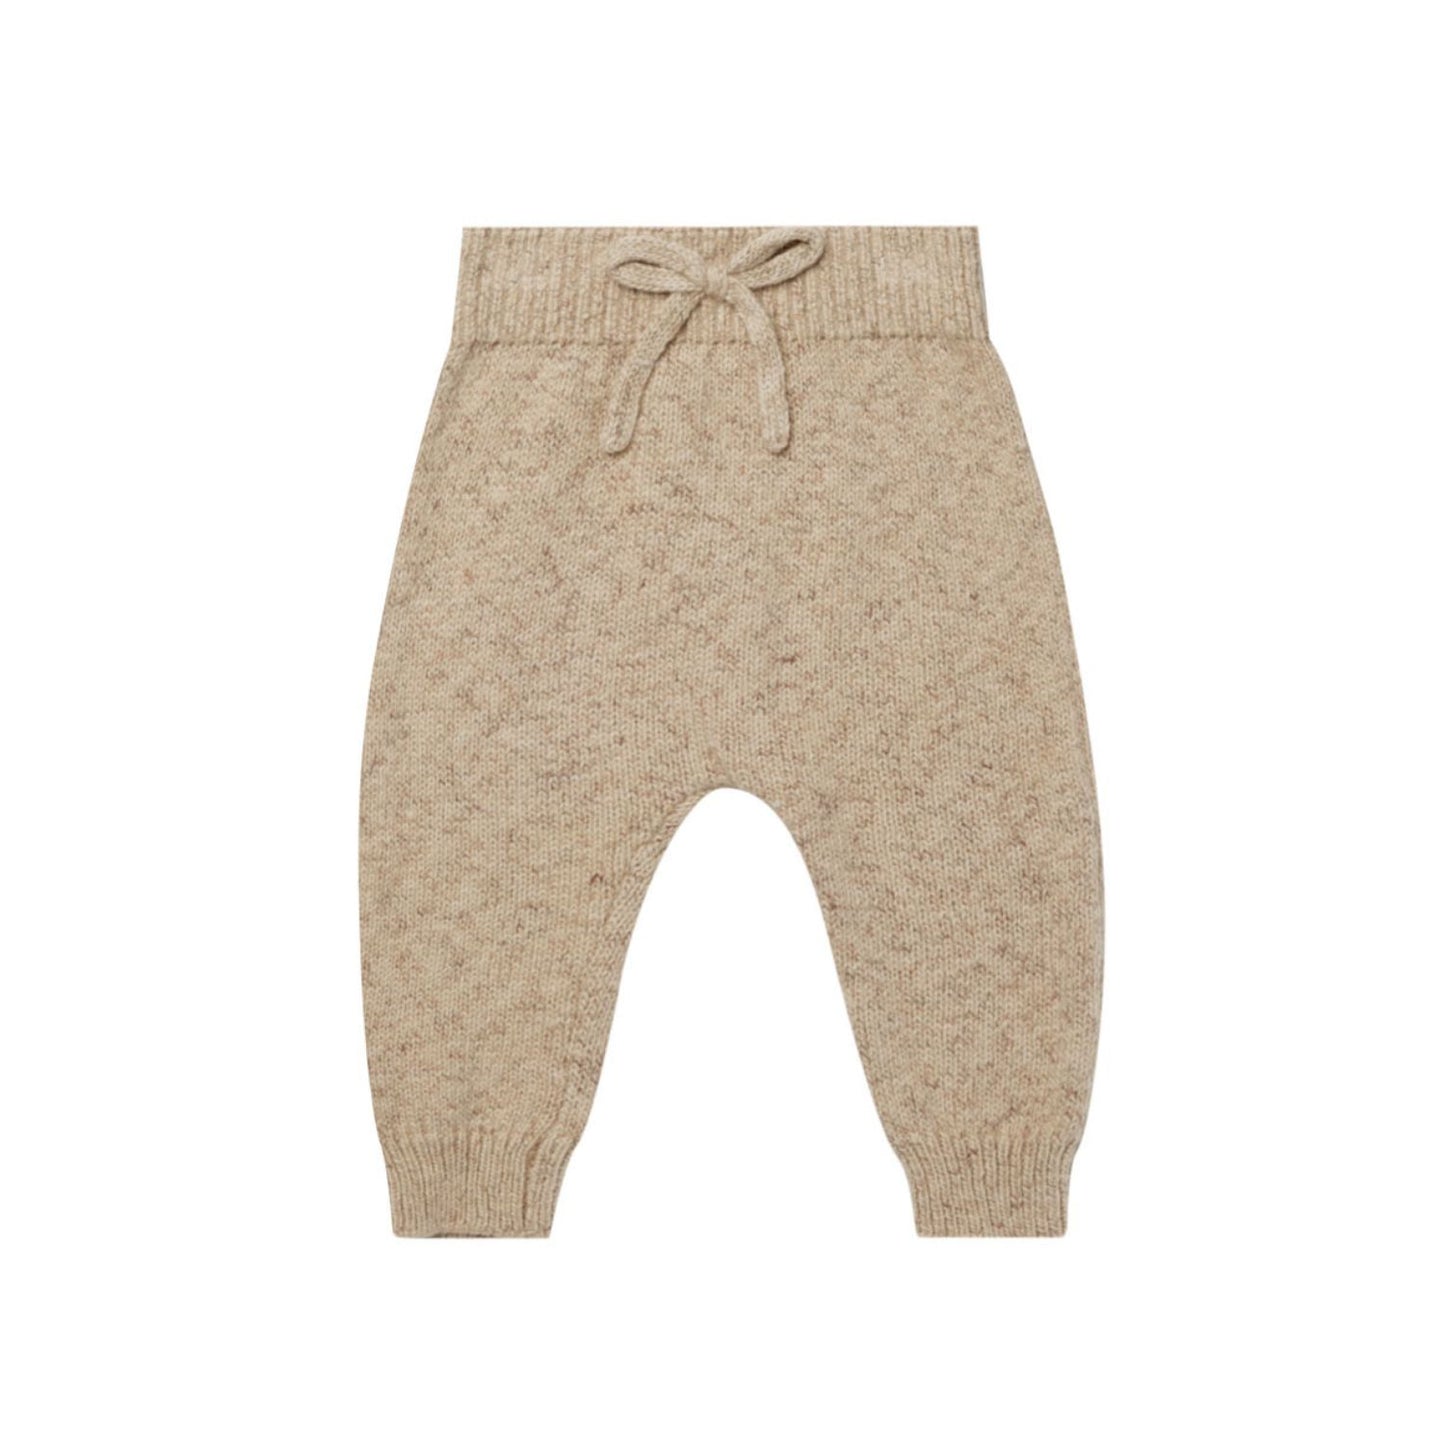 Quincy Mae Speckled Knit Pant - Latte Speckled